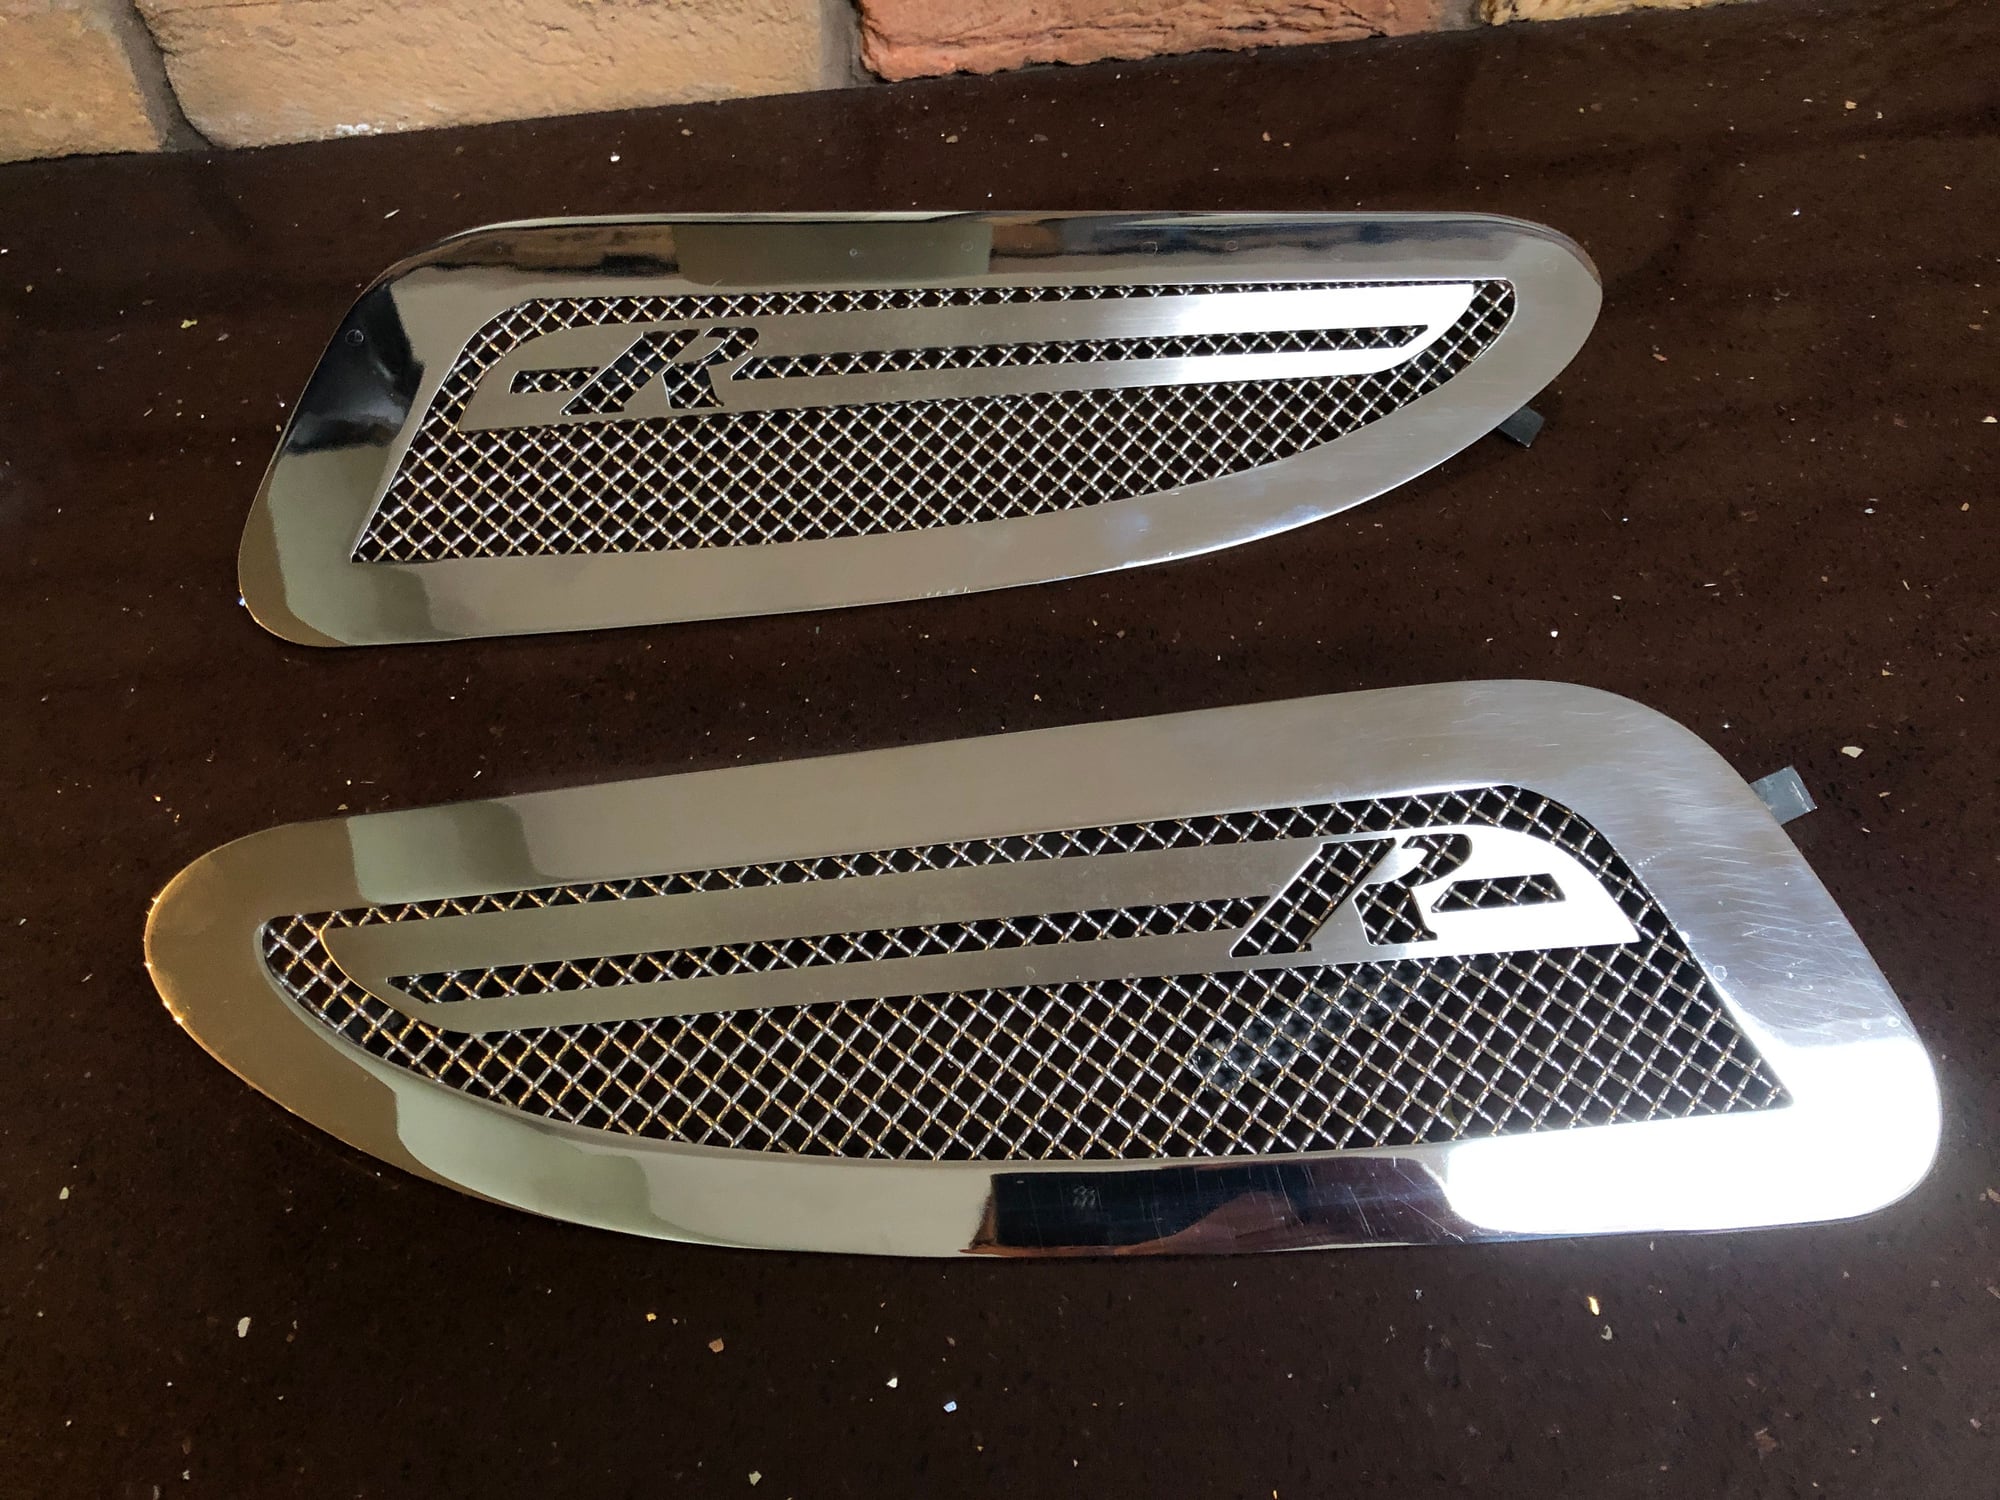 Exterior Body Parts - XKr stainless steel bonnet vents - Used - 2010 to 2015 Jaguar XKR - Accrington BB55PW, United Kingdom